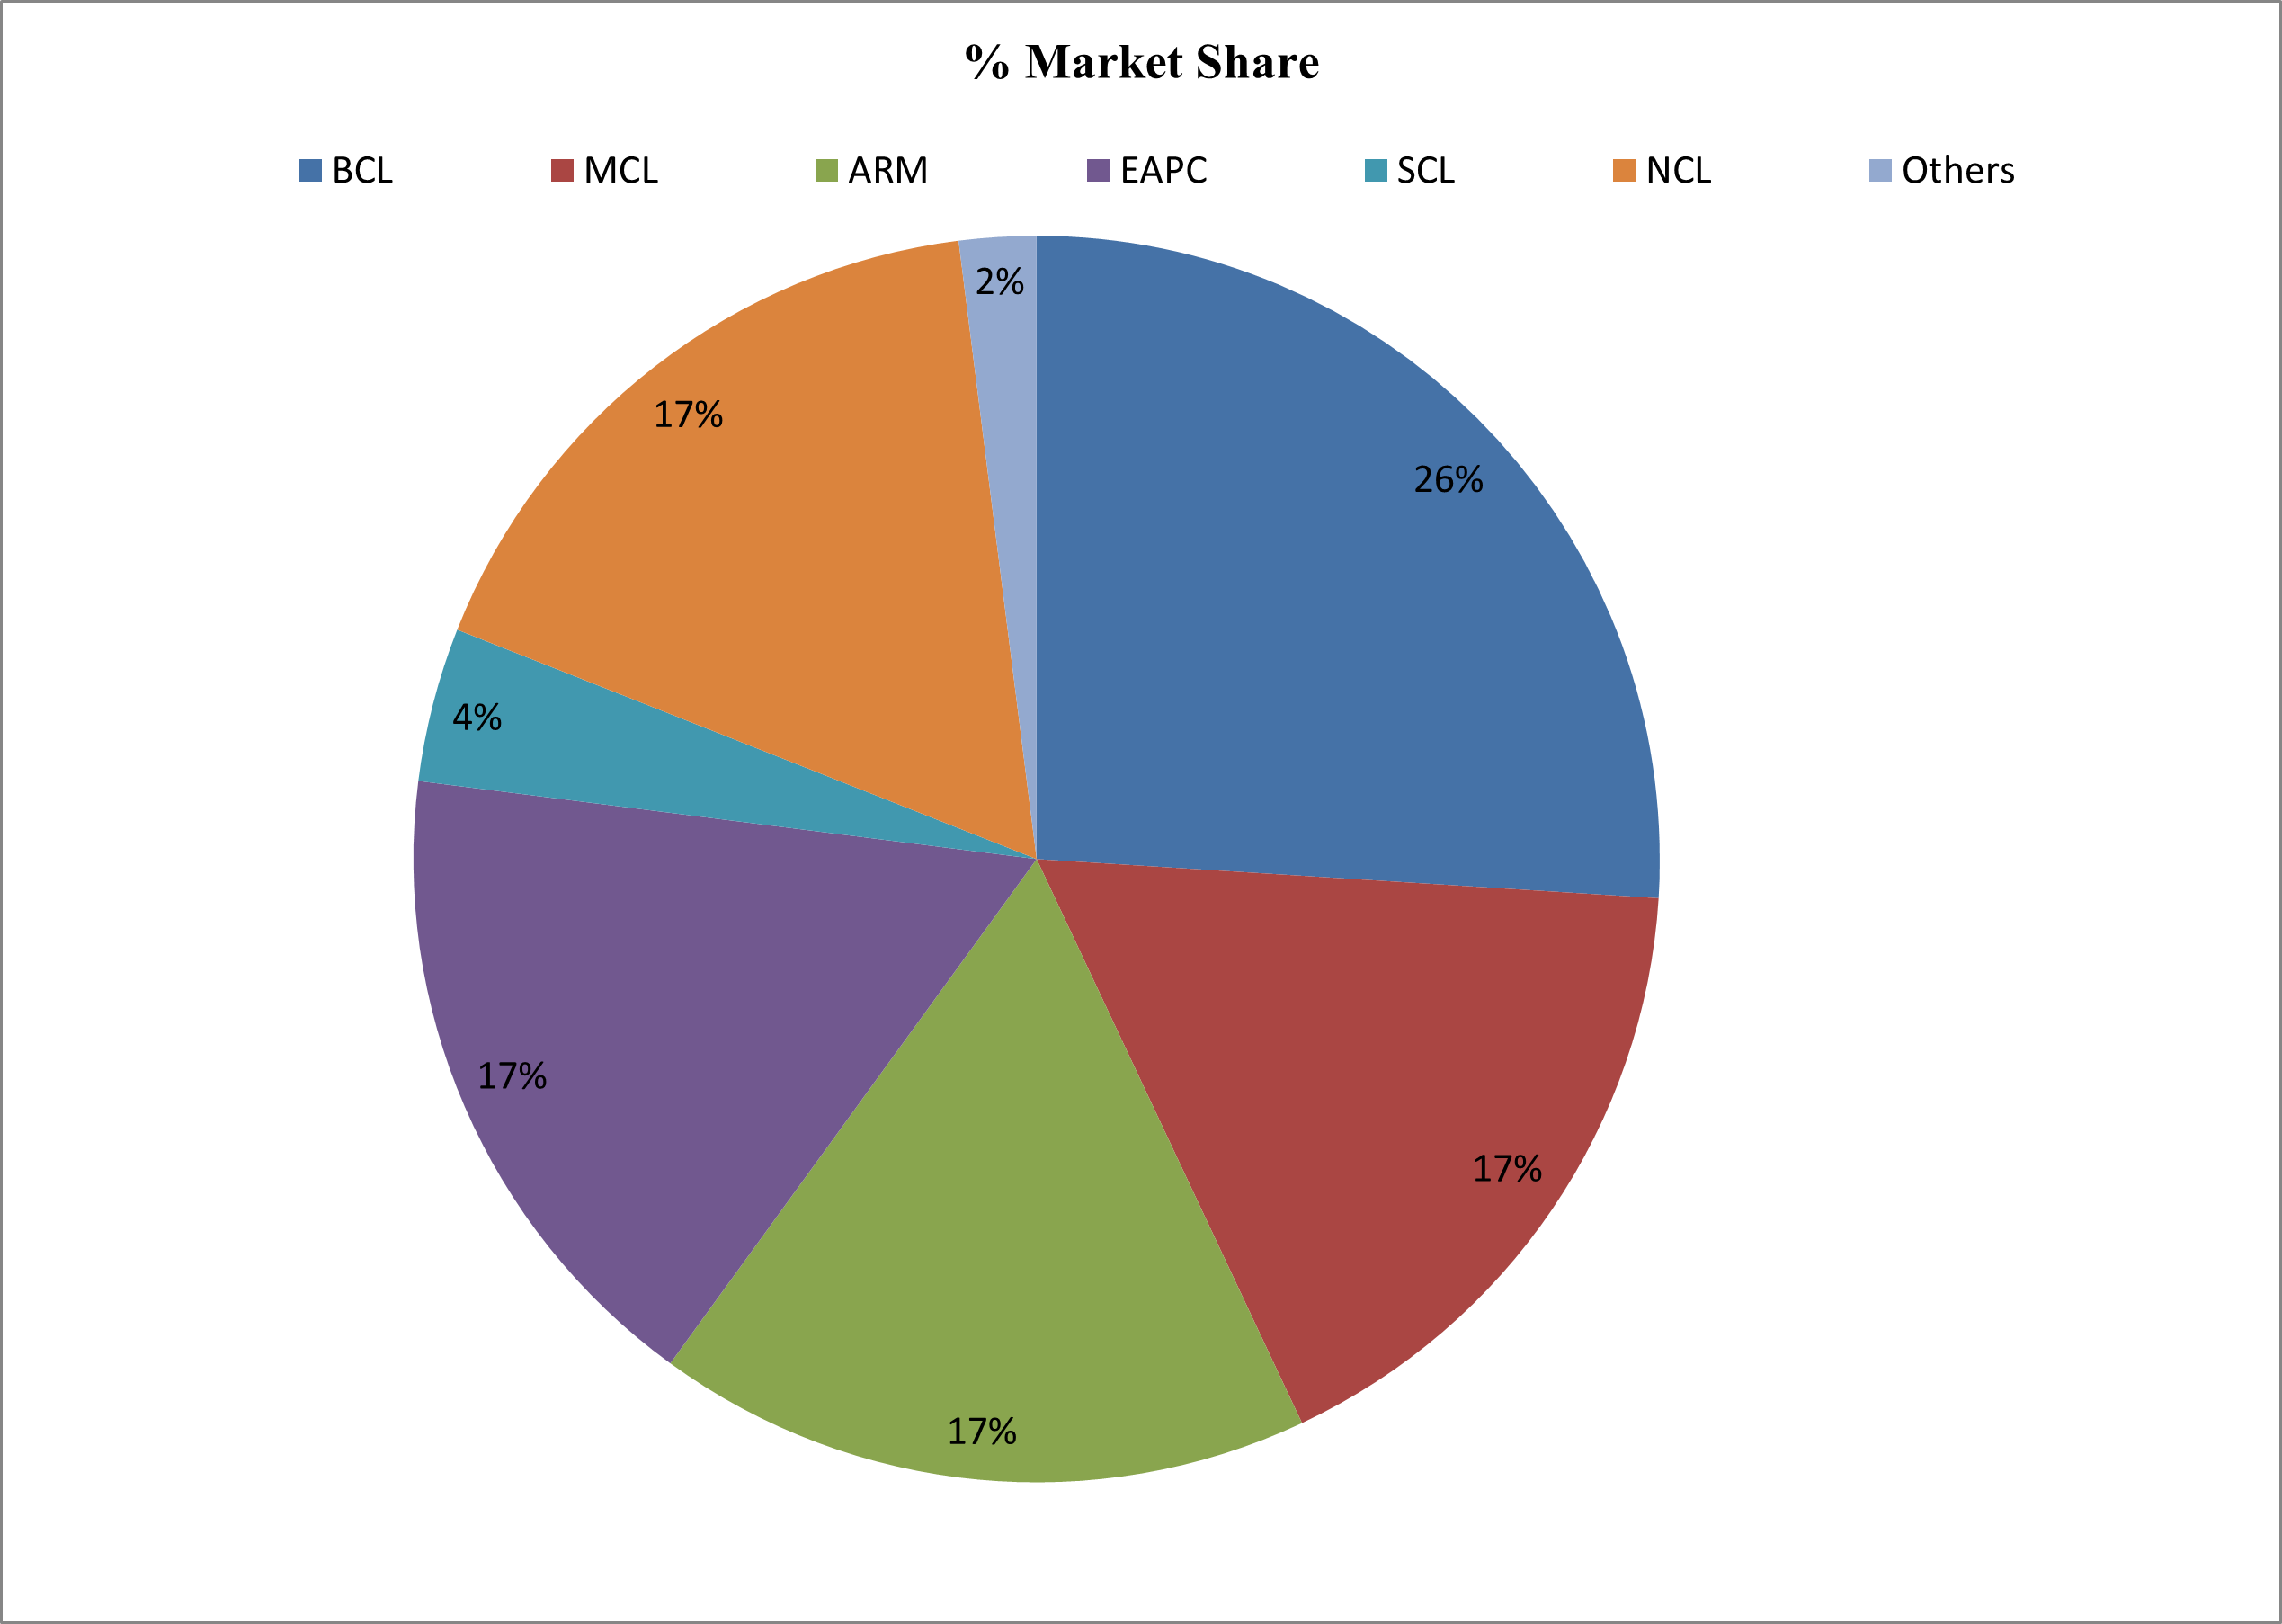 Market share distribution among cement firms in Kenya